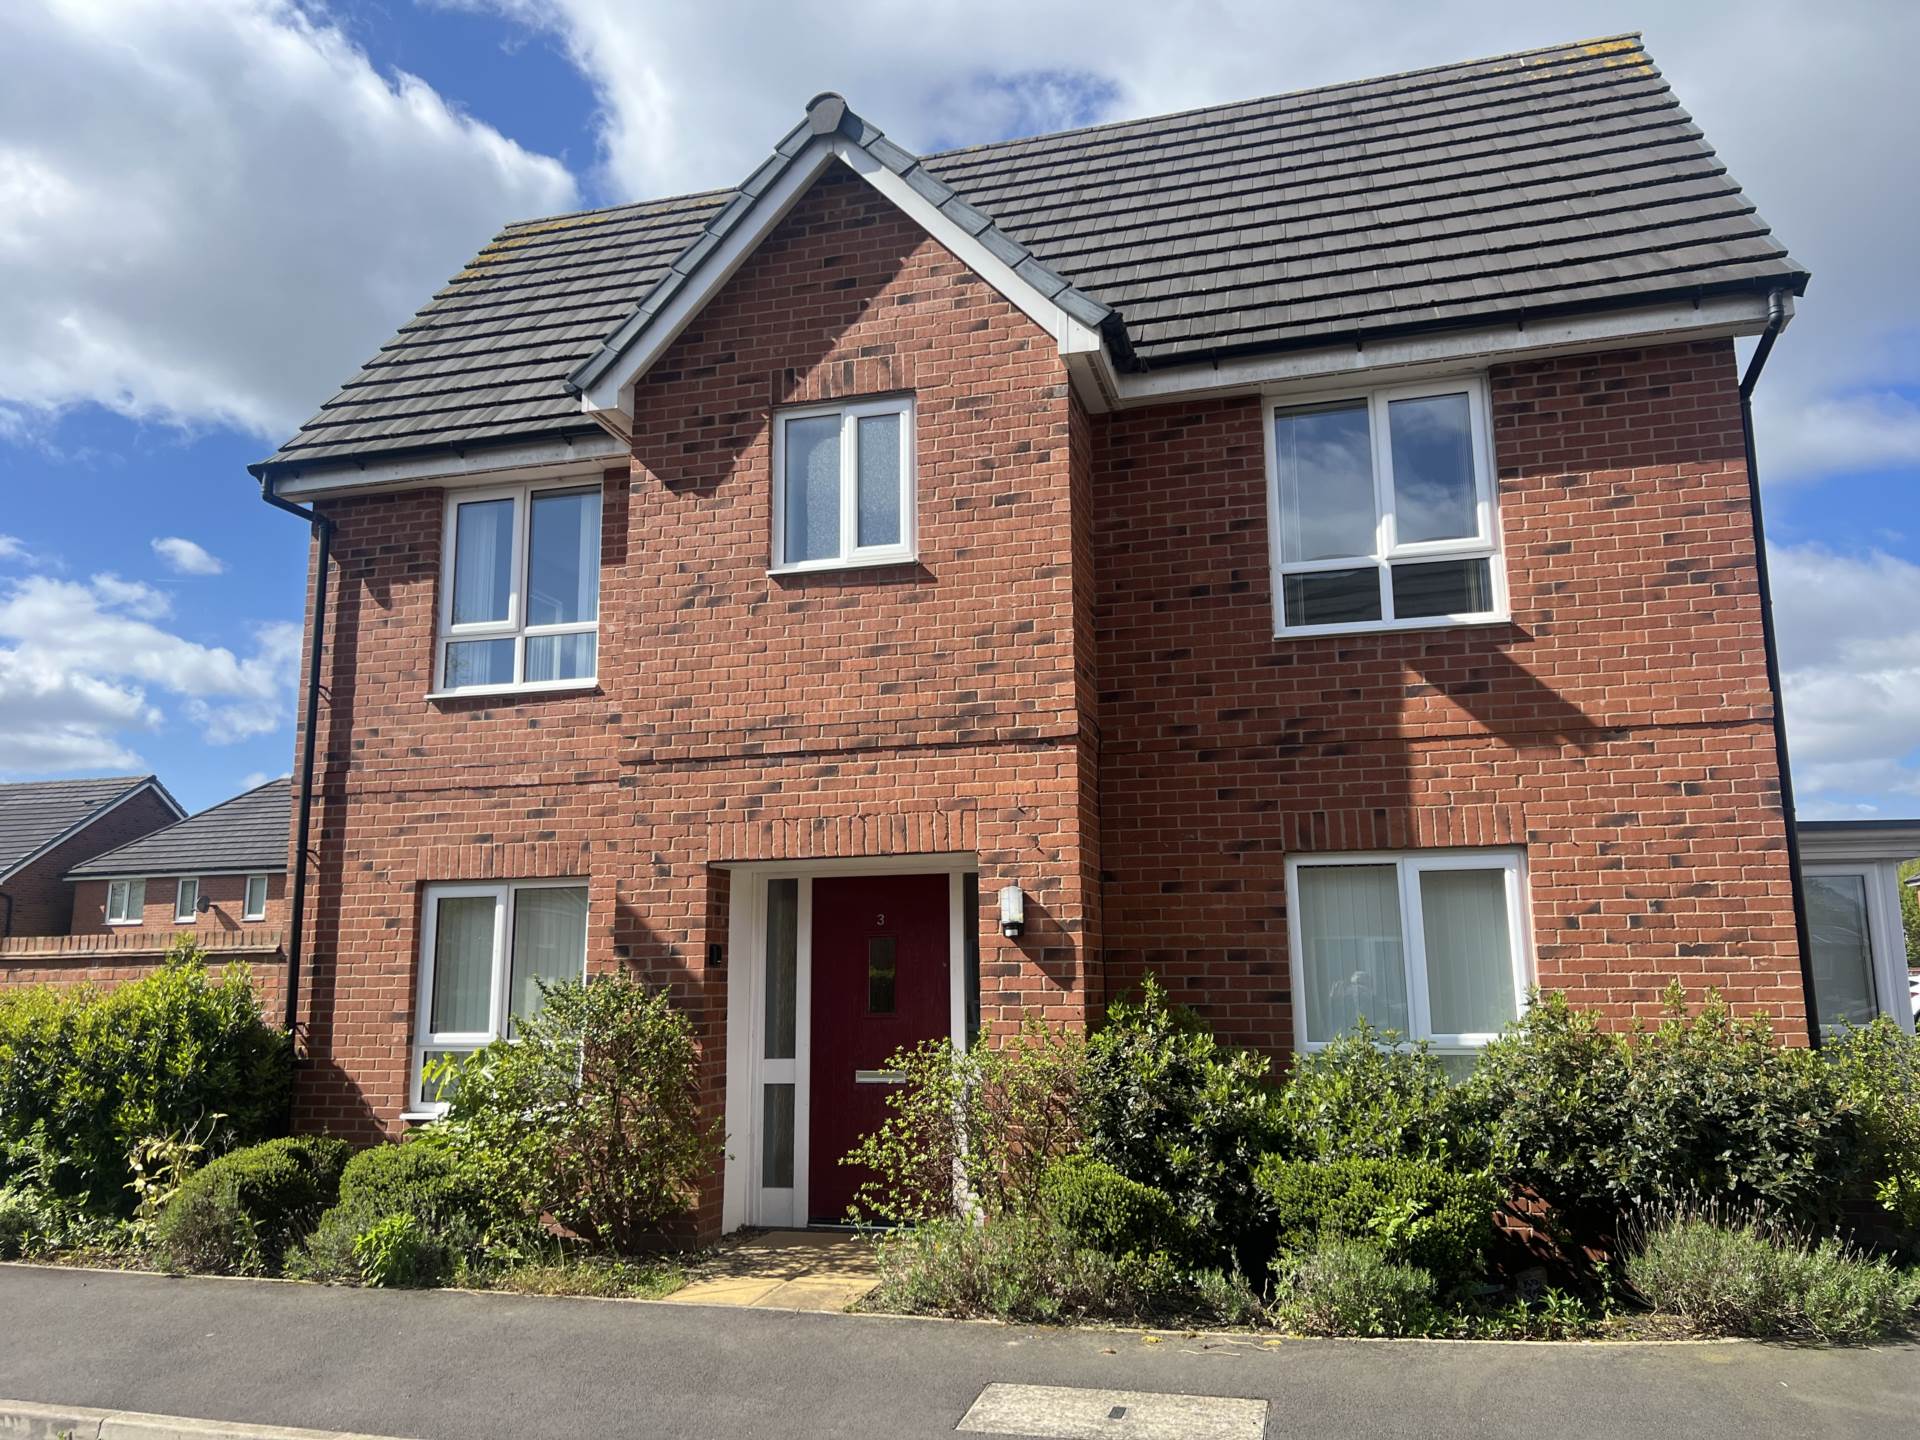 3 bed Semi-Detached House for rent in Warrington. From HLGB - Warrington